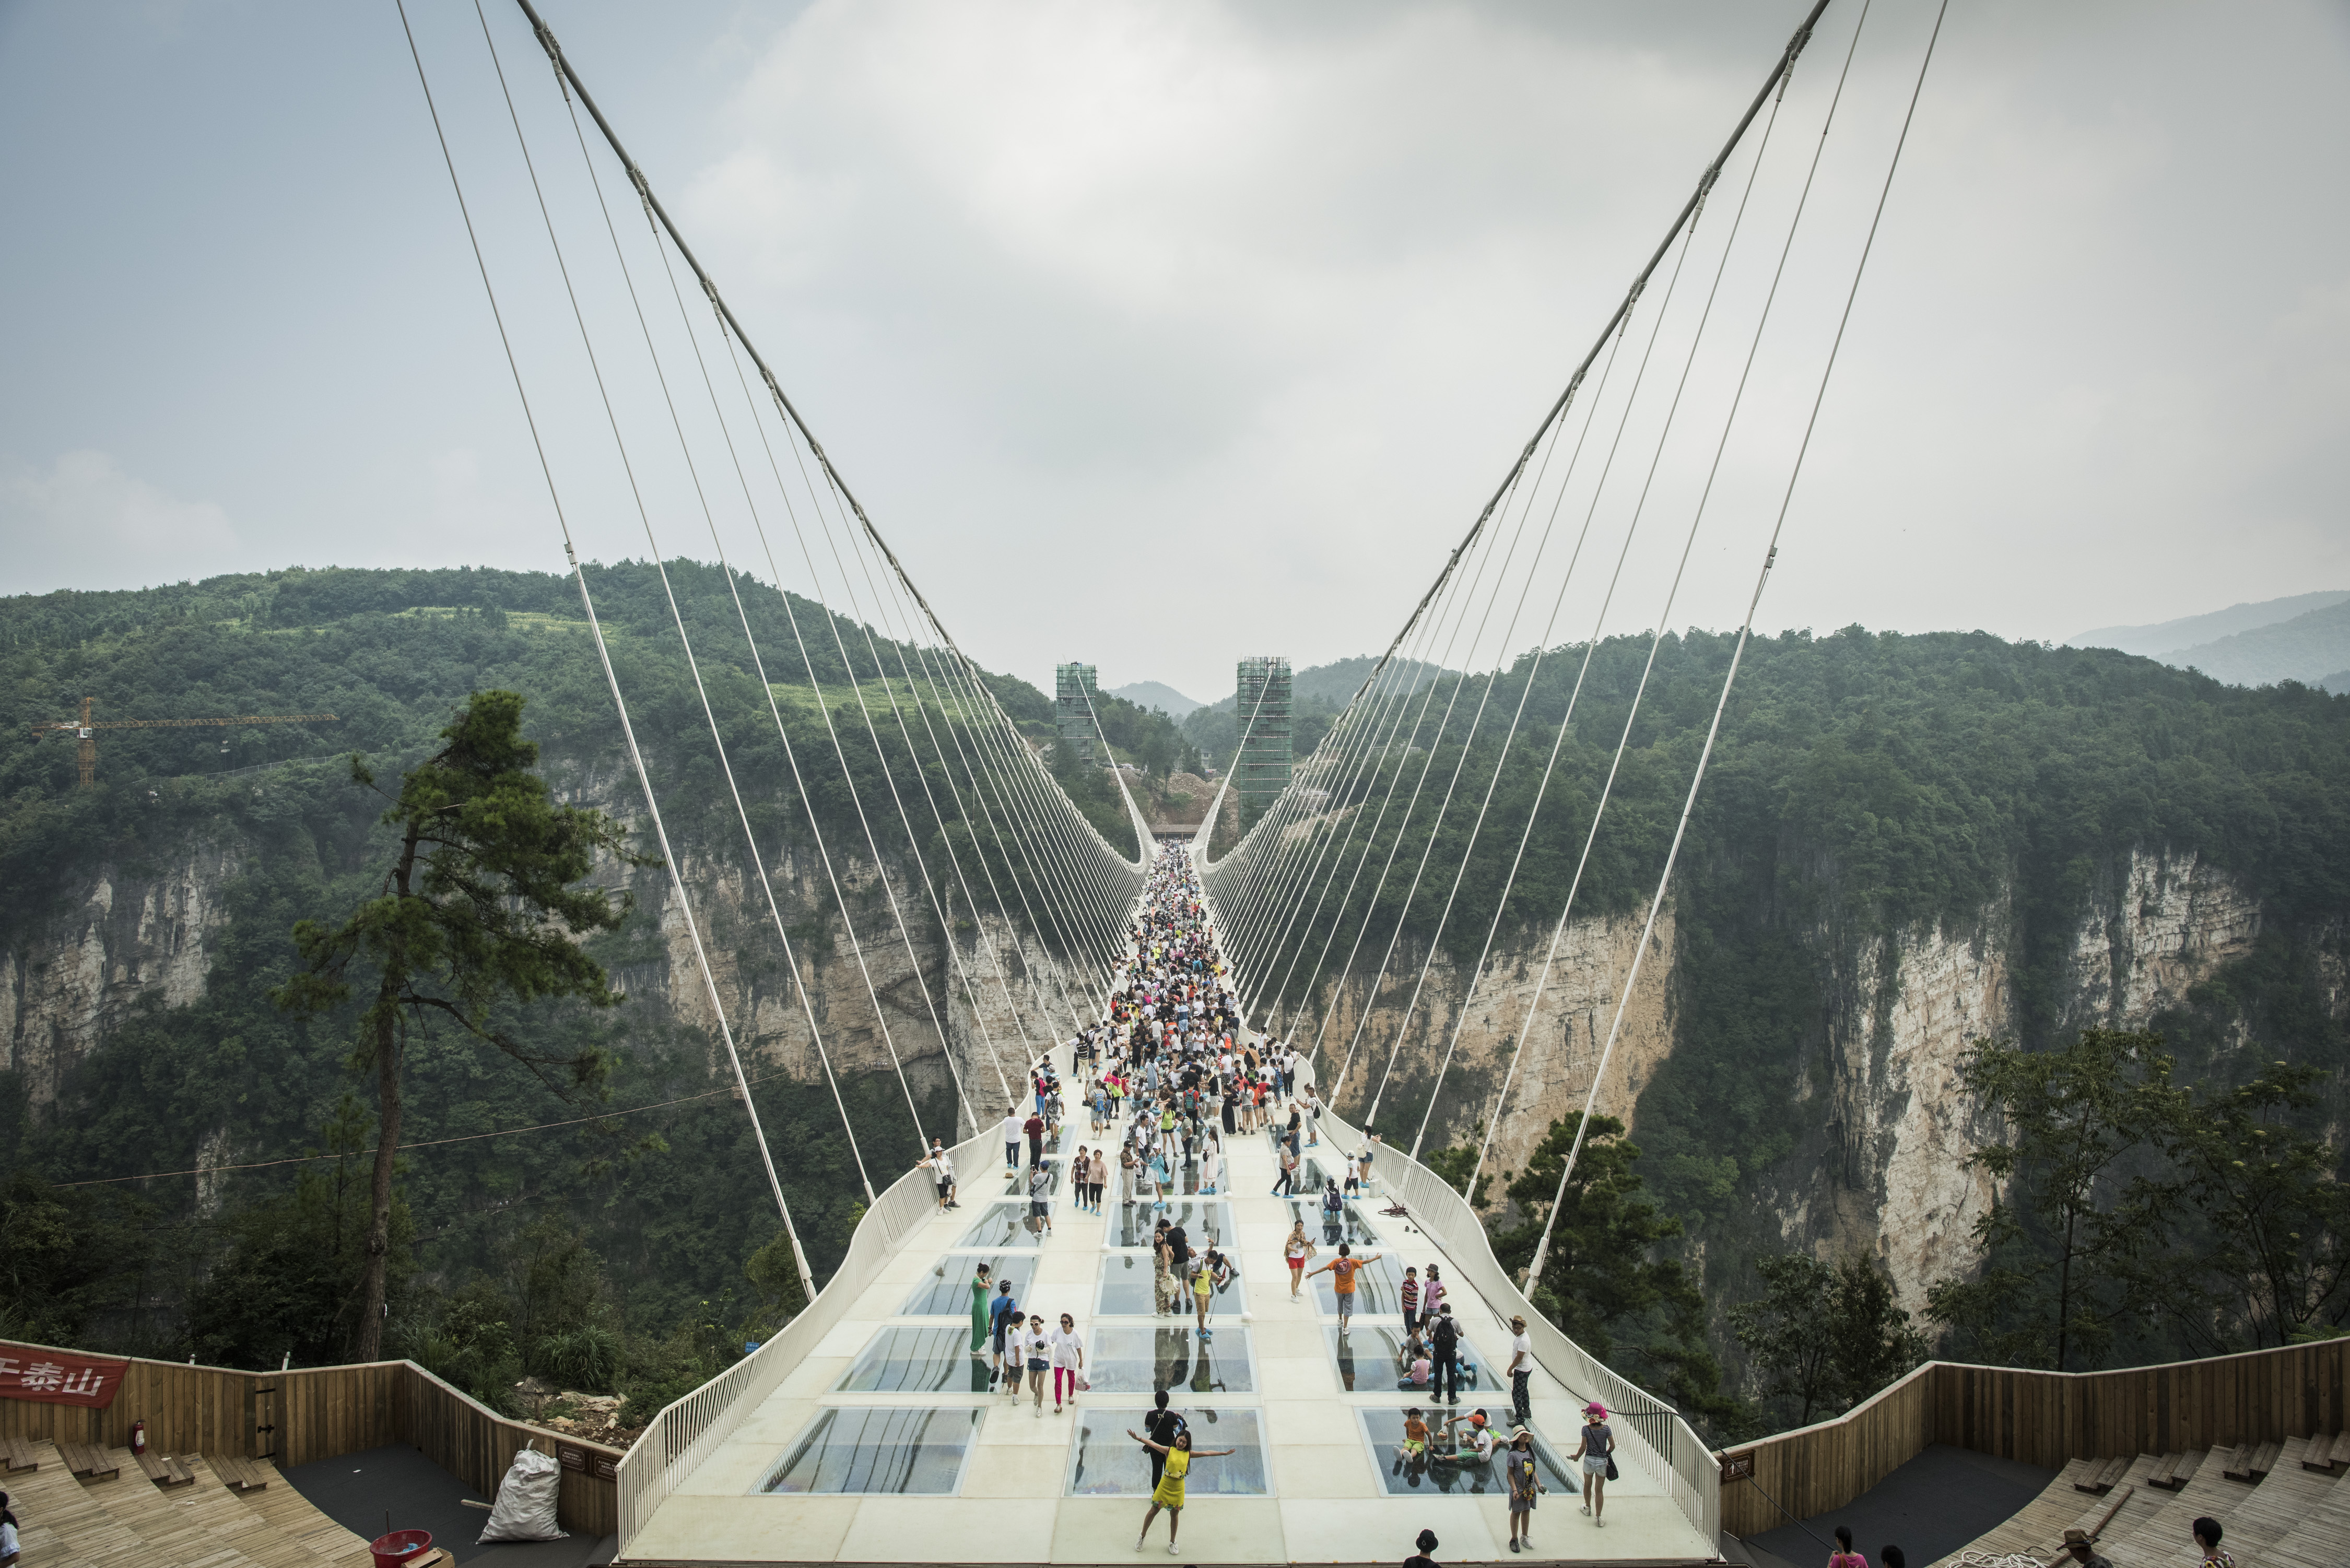 Visitors cross the world's highest and longest glass-bottomed bridge above a valley in Zhangjiajie in China's Hunan Province on August 21, 2016. / AFP PHOTO / FRED DUFOUR